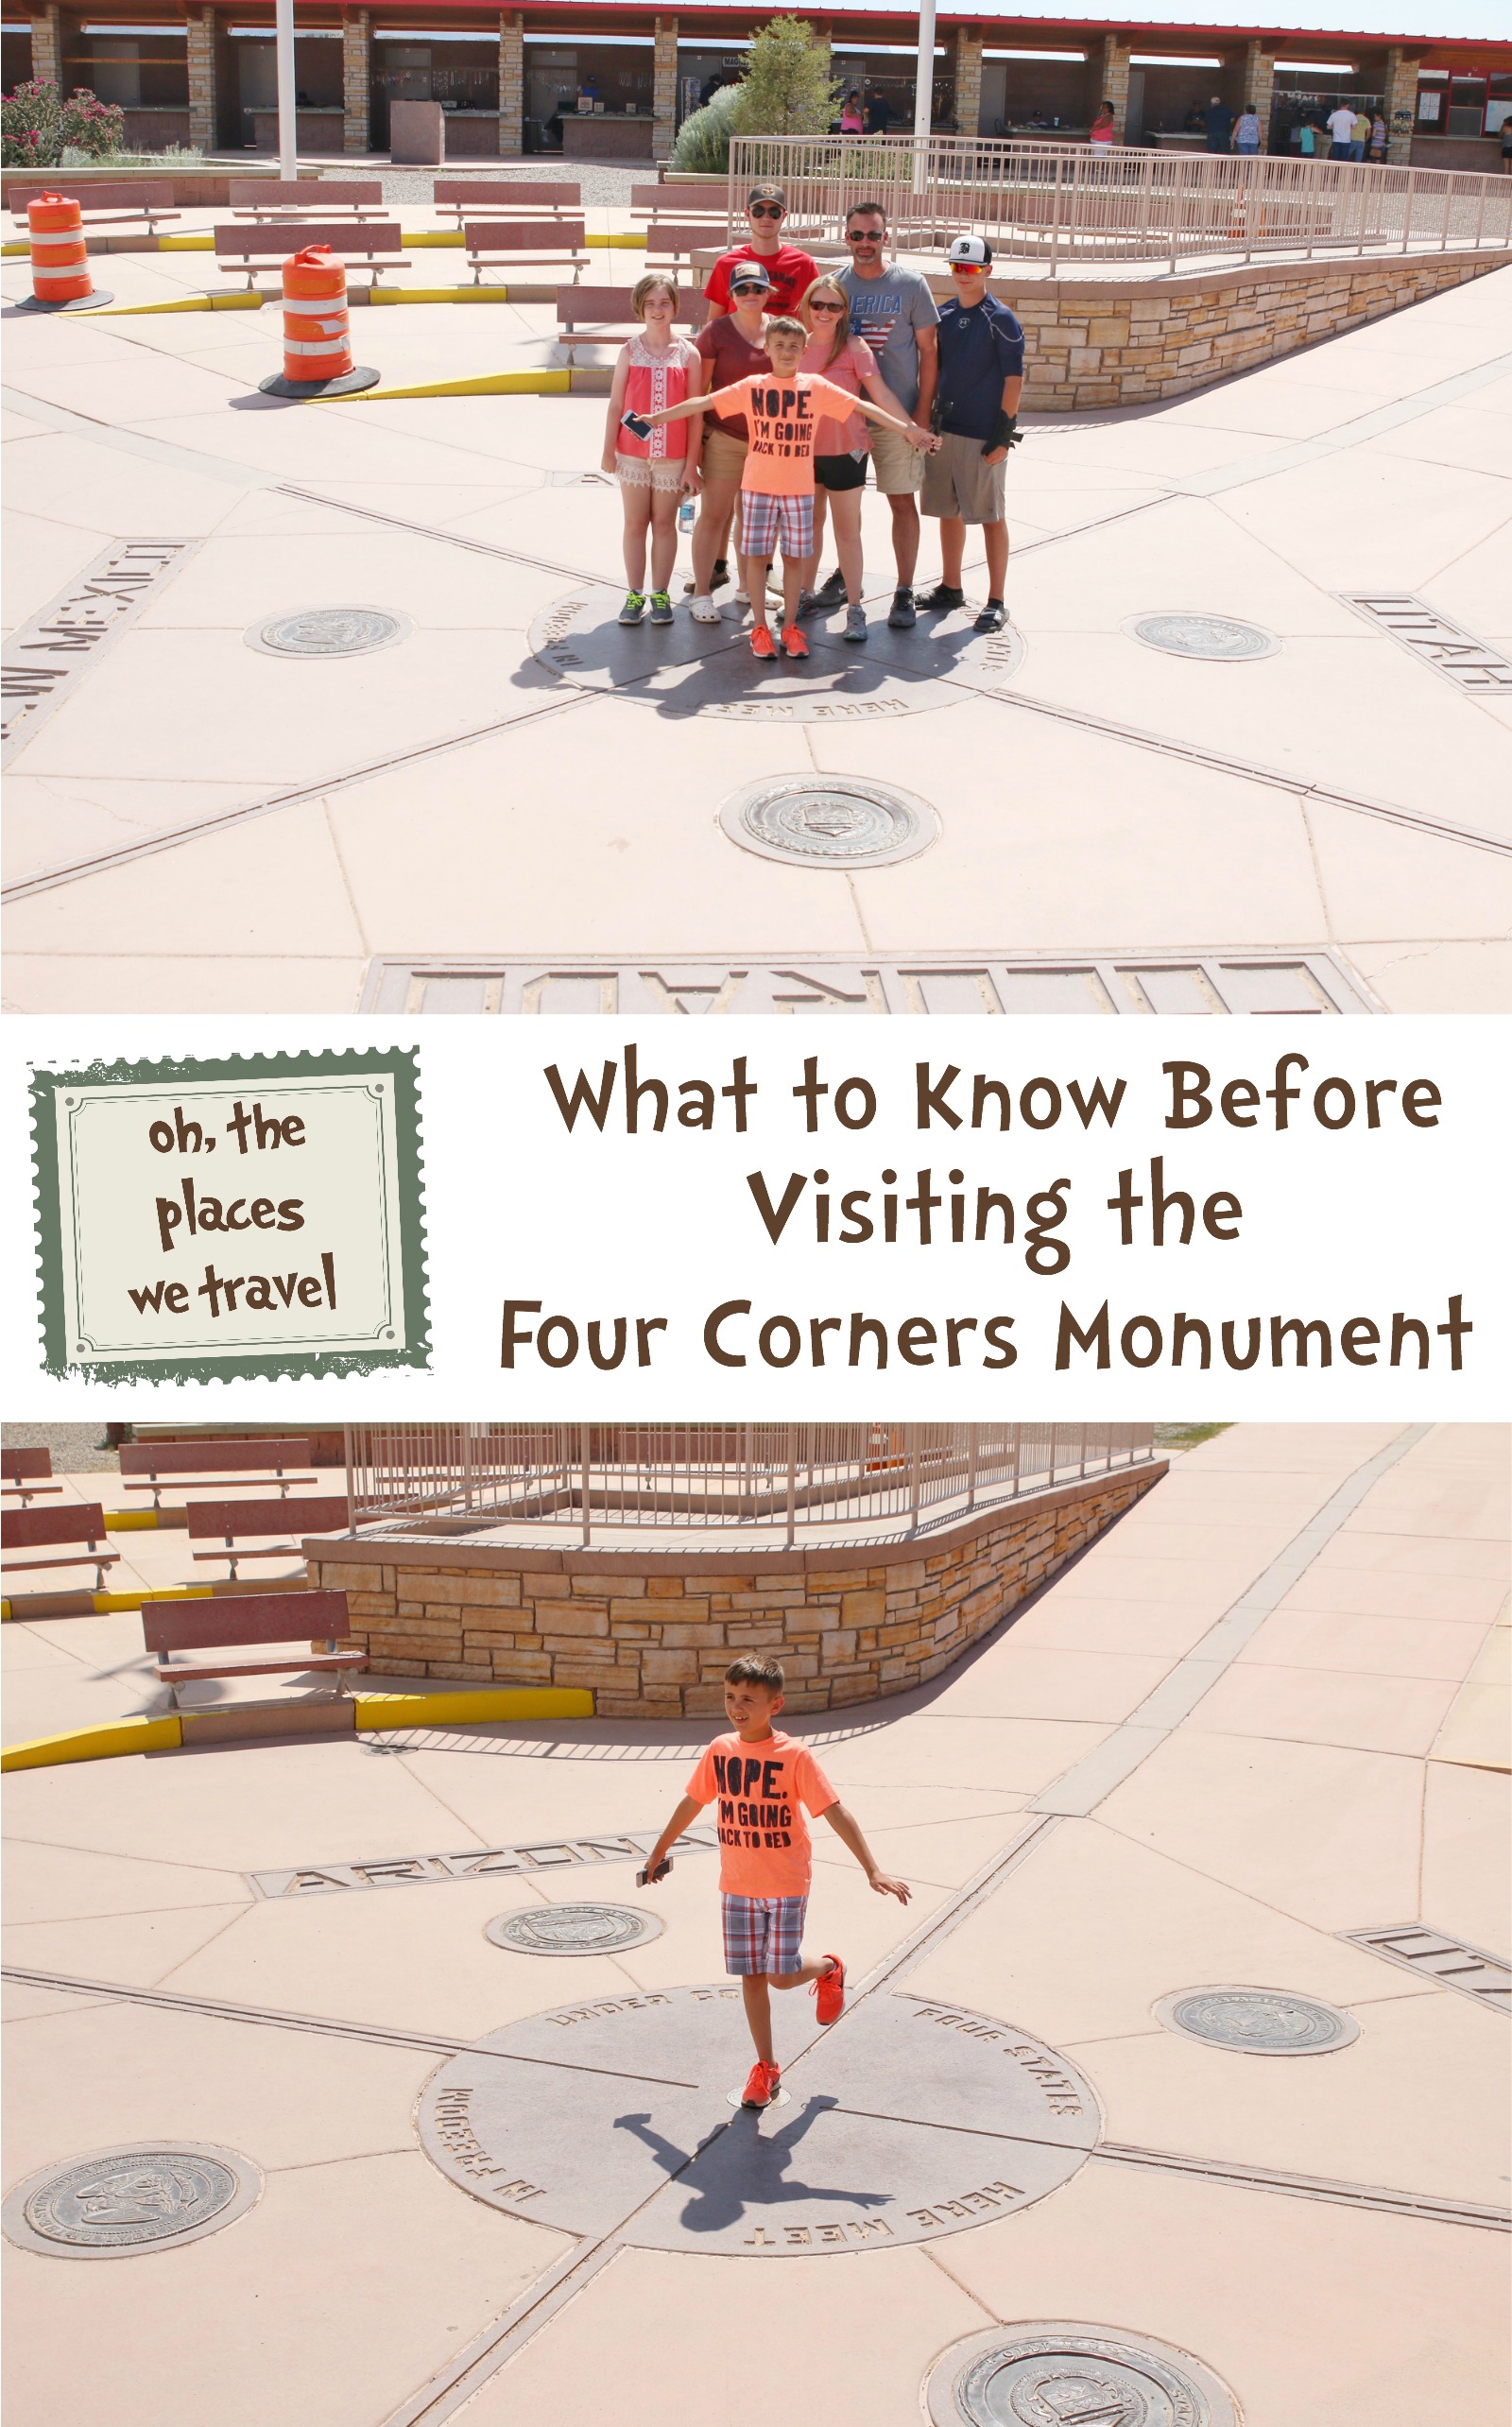 What to Know Before Visiting the Four Corners Monument